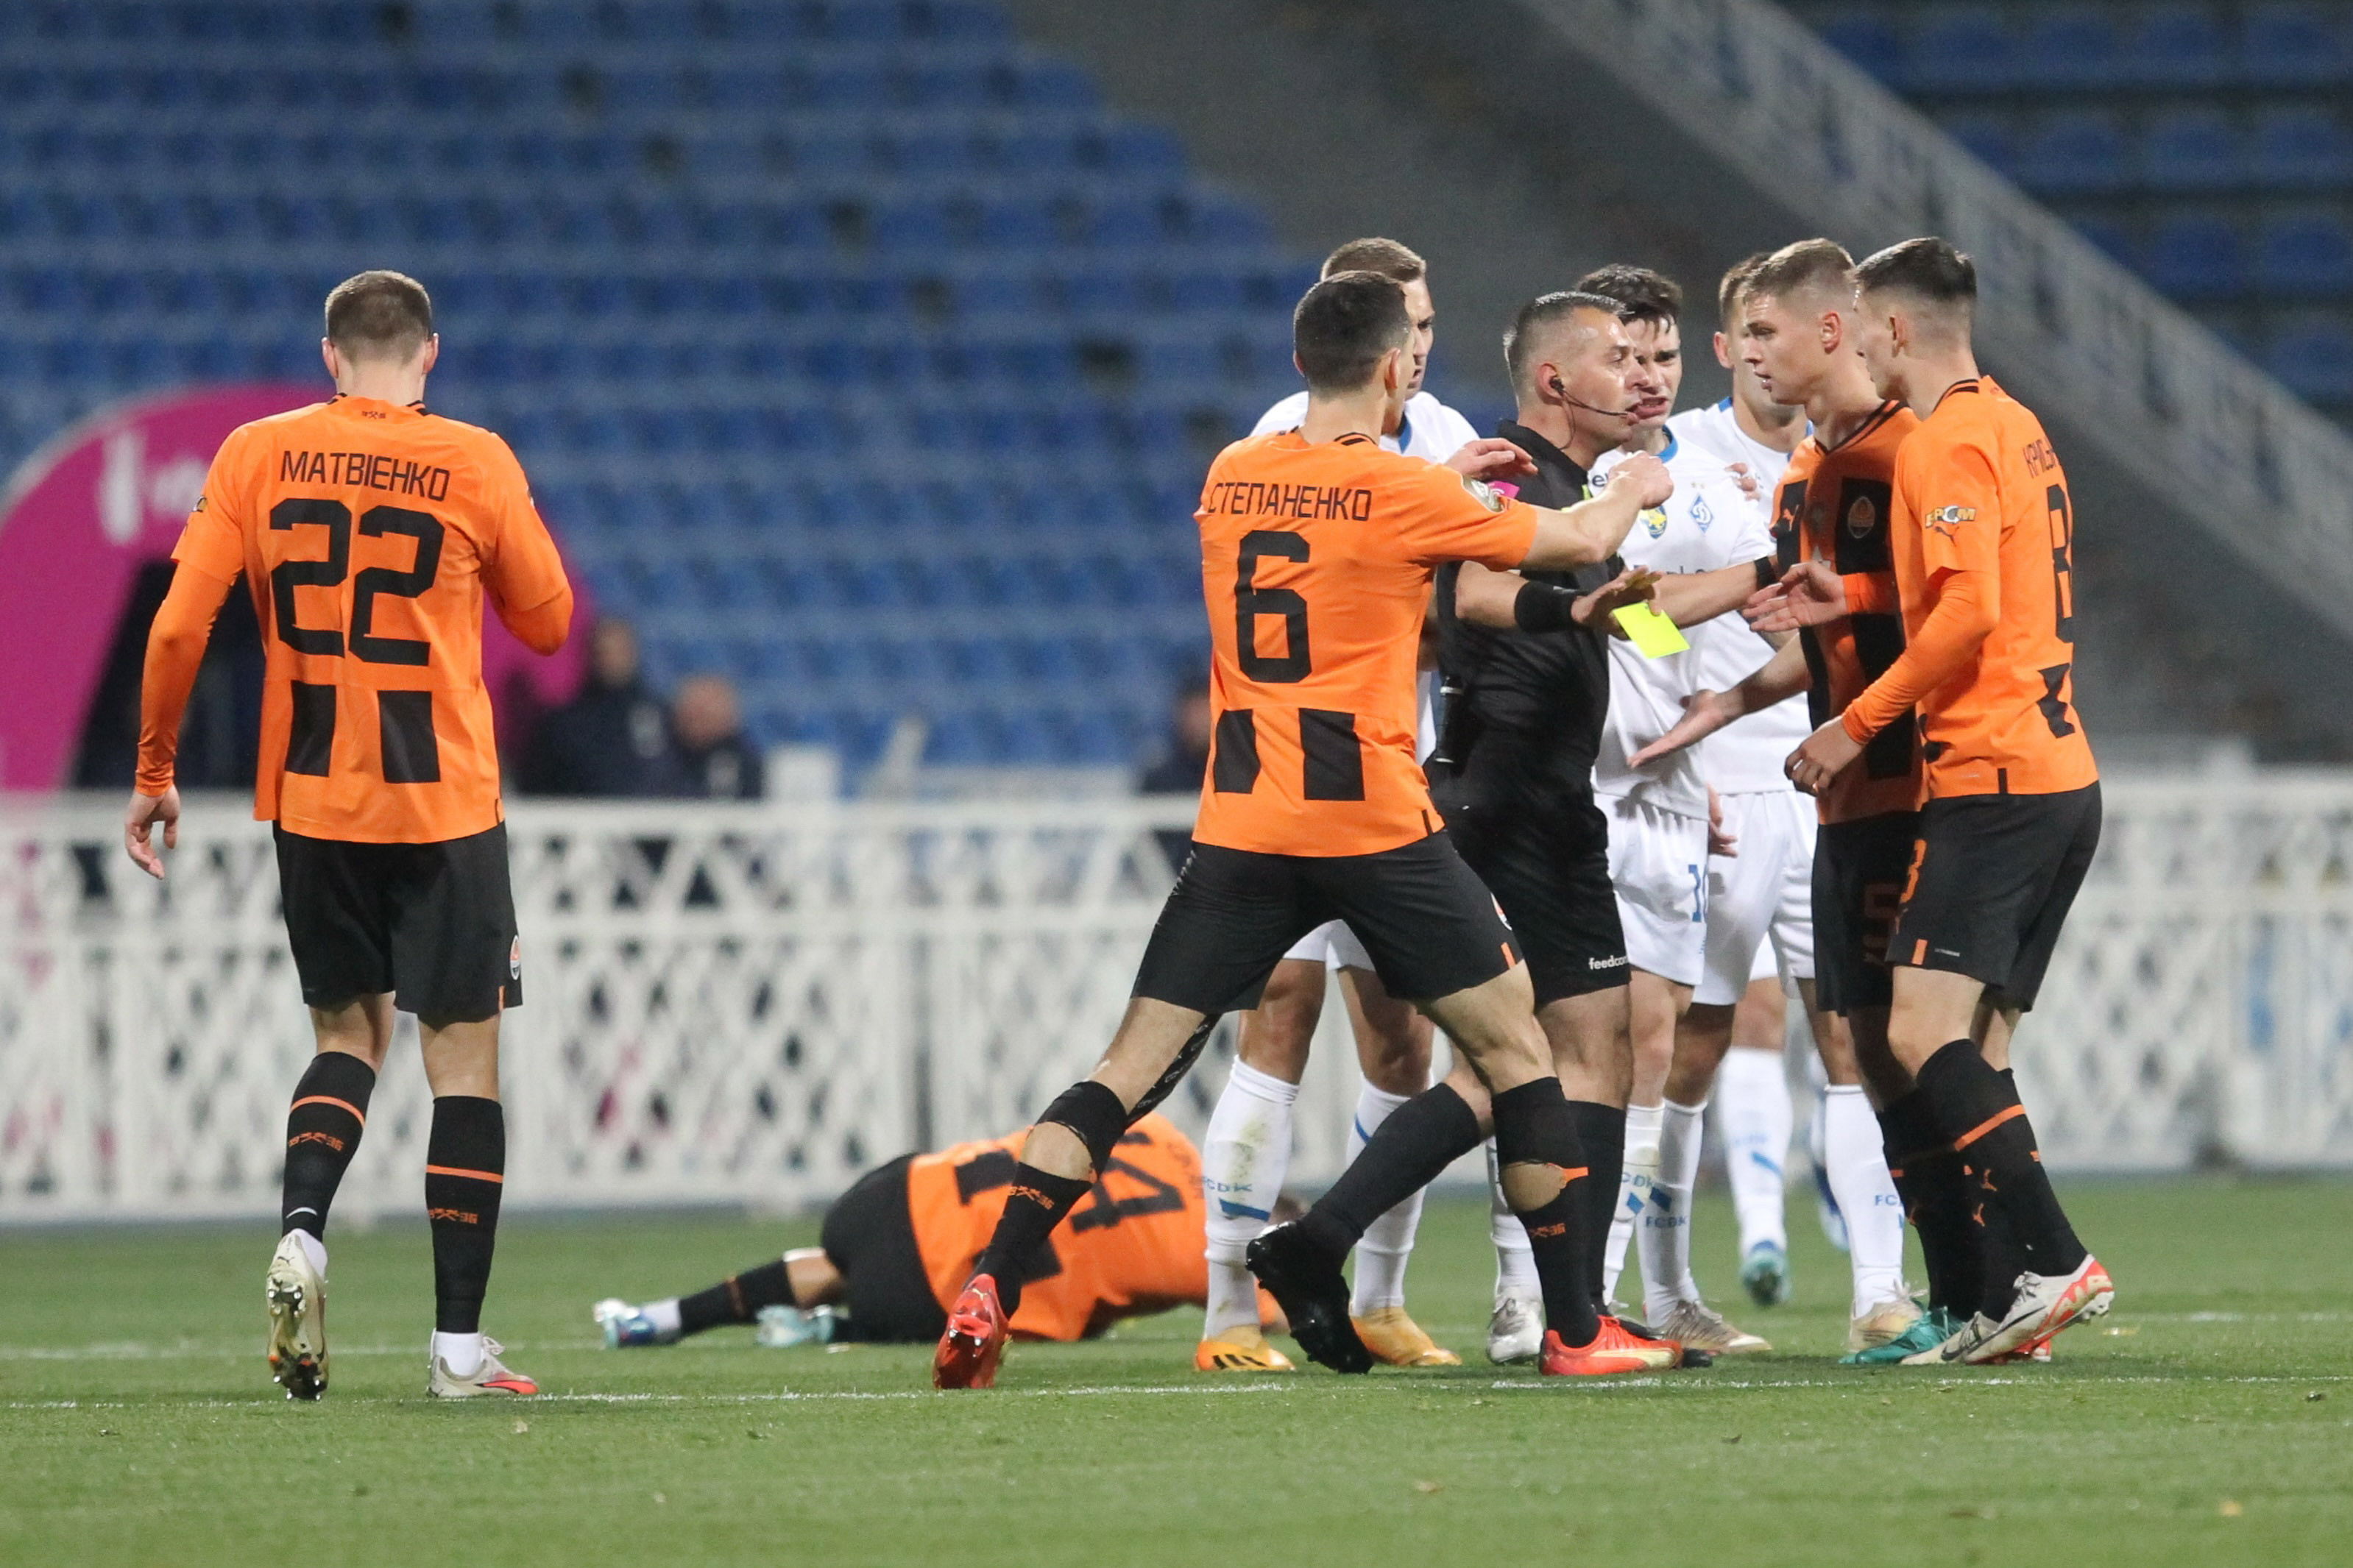 UPL. Dynamo – Shakhtar – 0:1: figures and facts